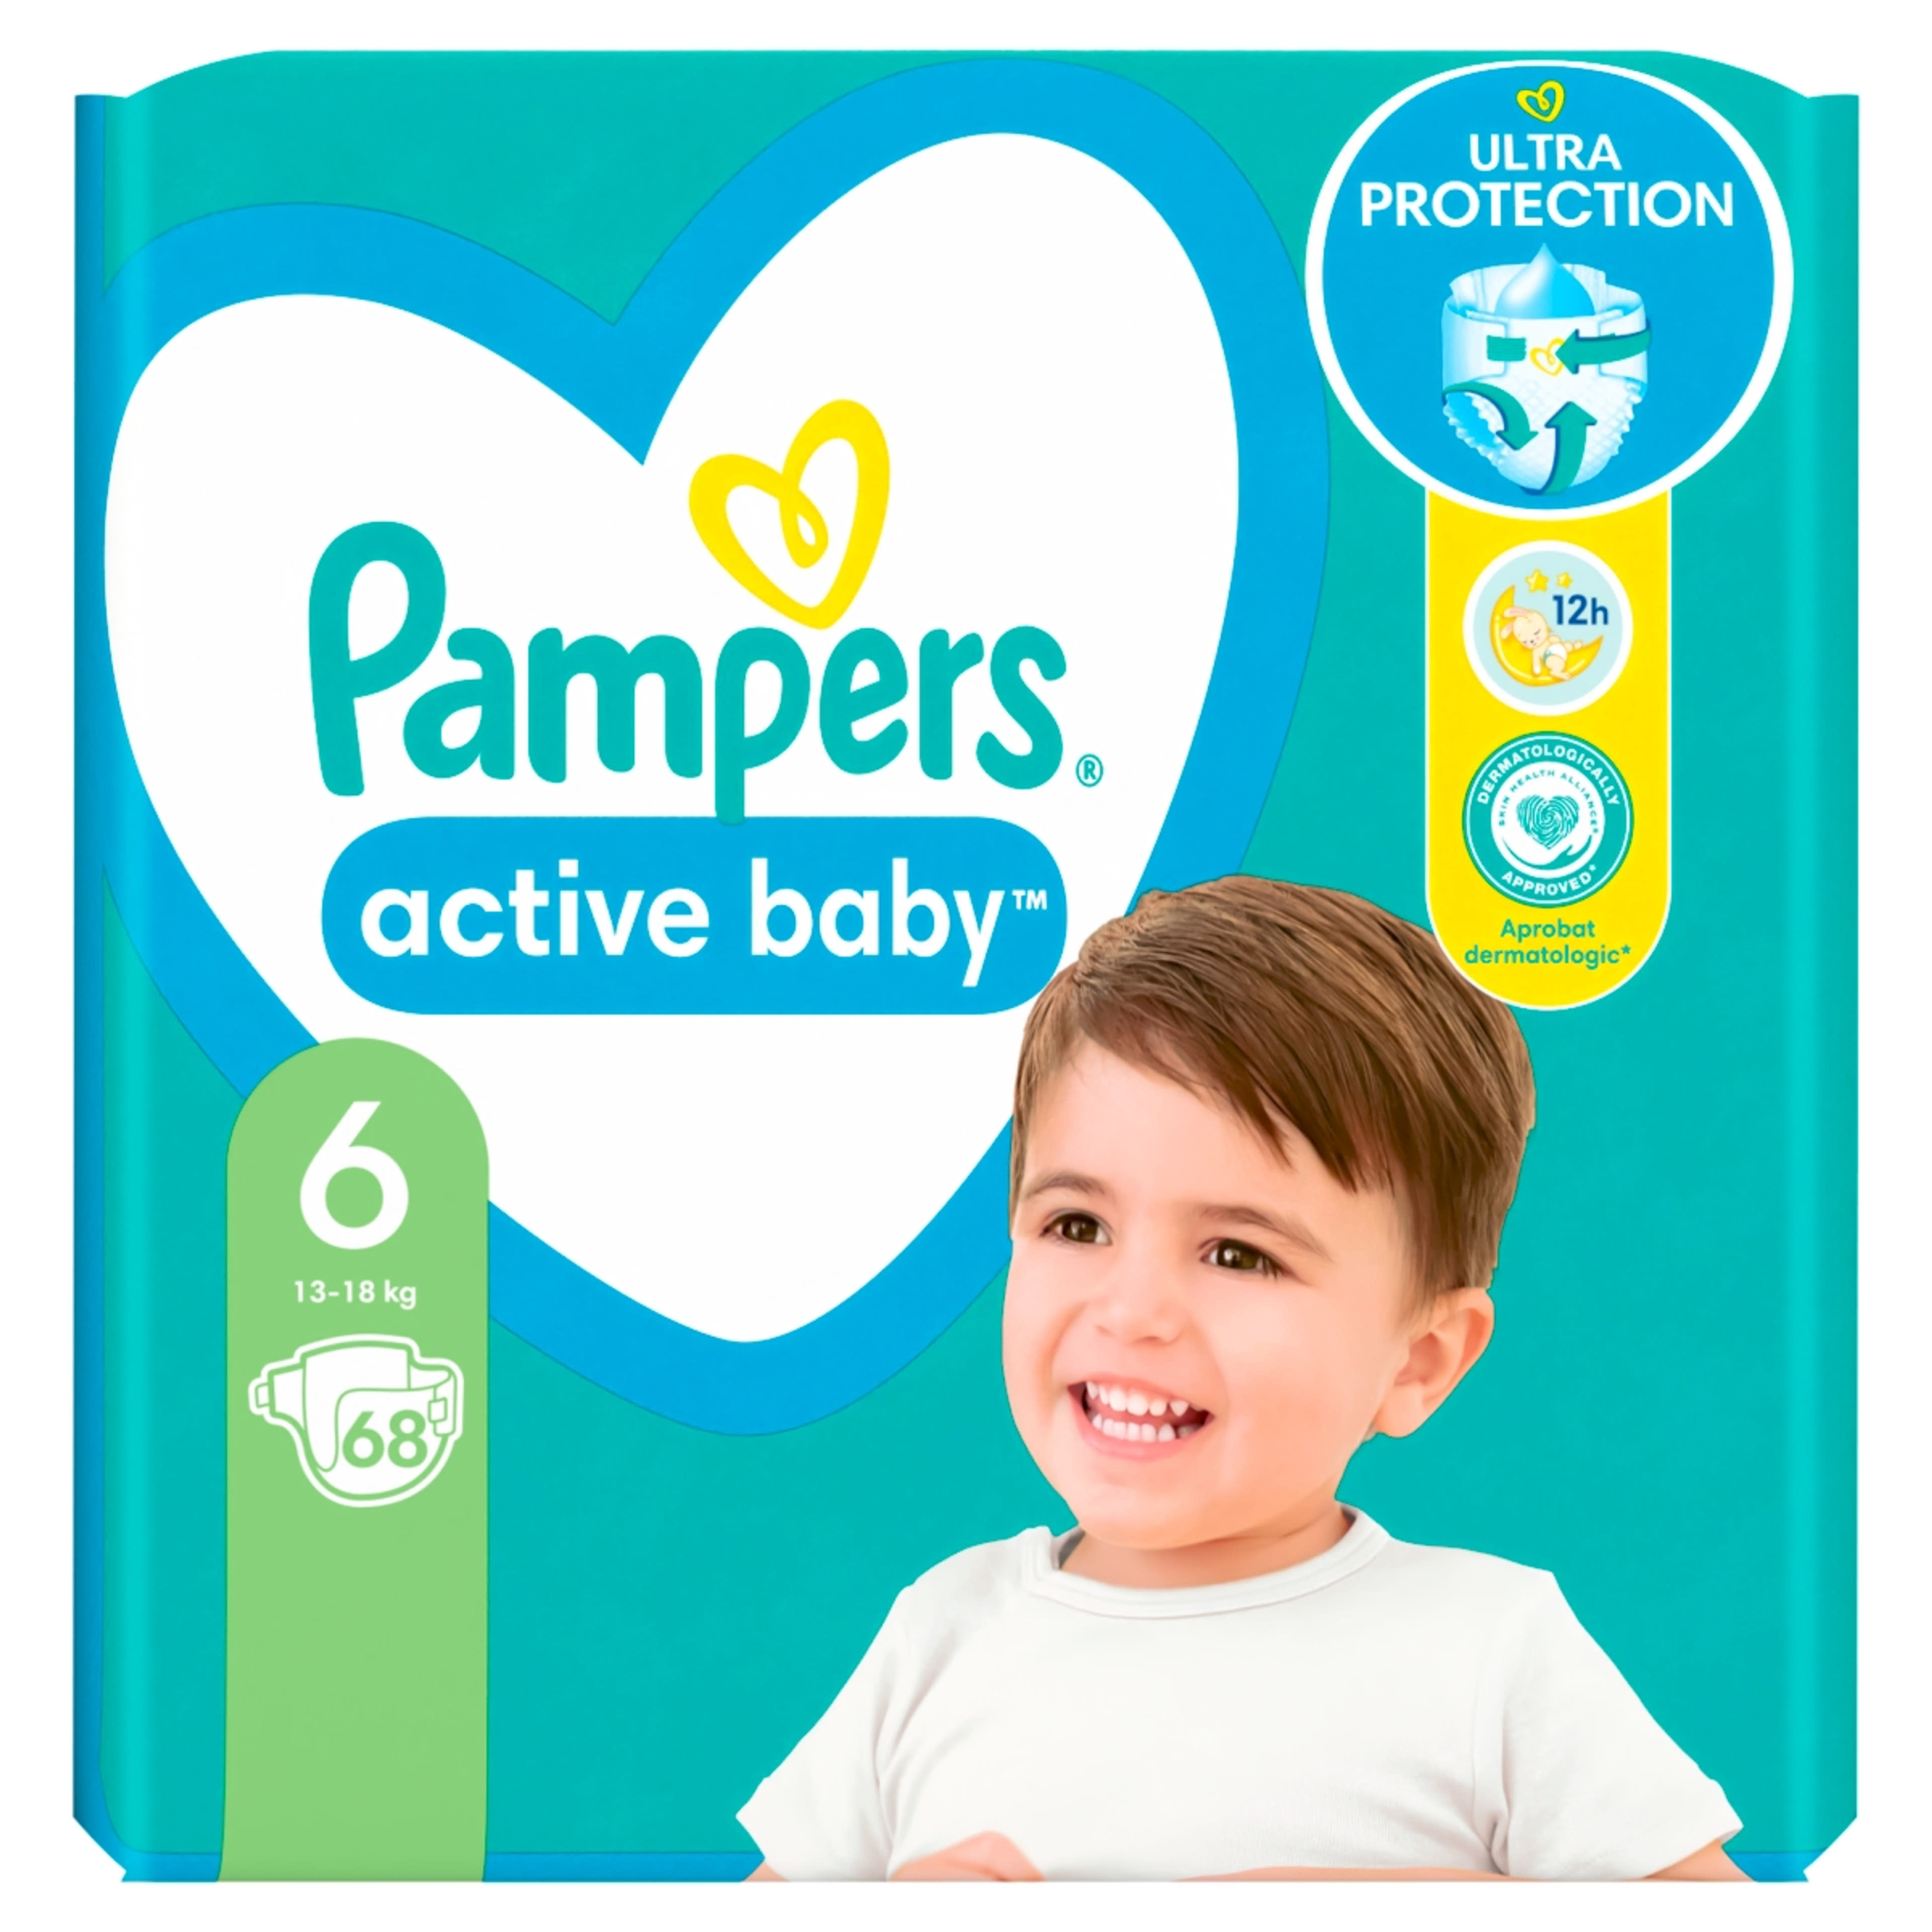 Pampers Giant Pack+ 6-os 13-18kg - 68 db